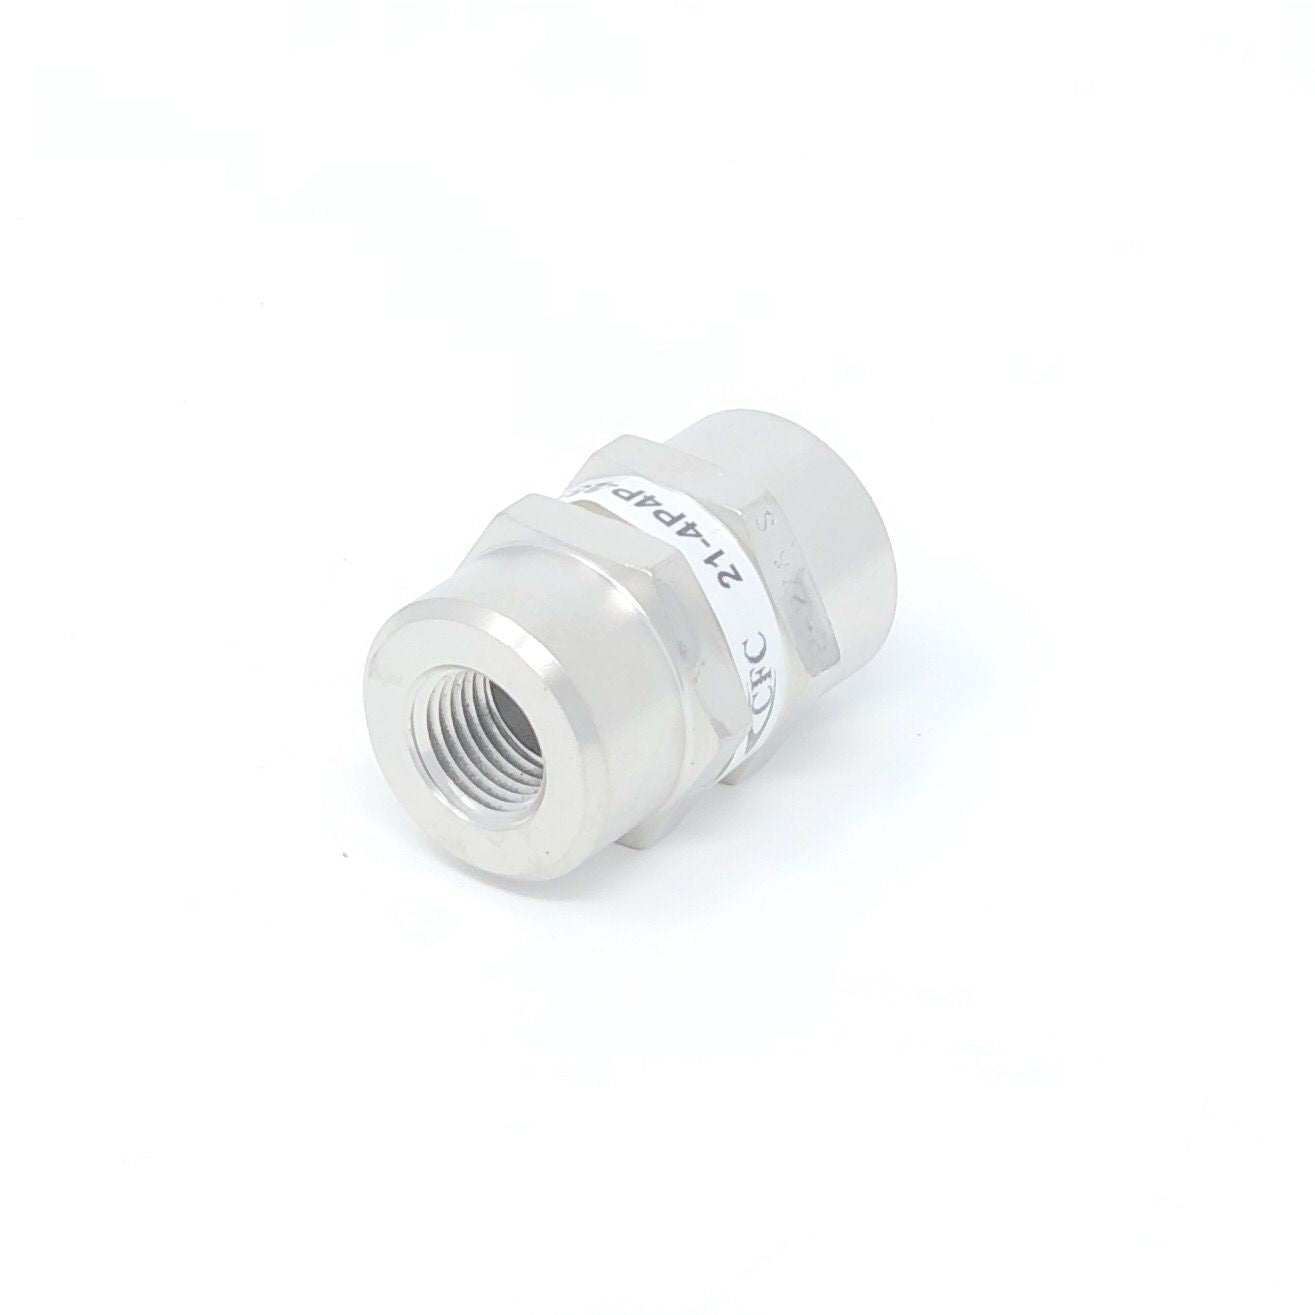 21-12T12T-10S : Chase High Pressure Inline Filter, 3000psi, 3/4" 37 Degree Flare , 10 Micron, No Visual Indicator, With Bypass